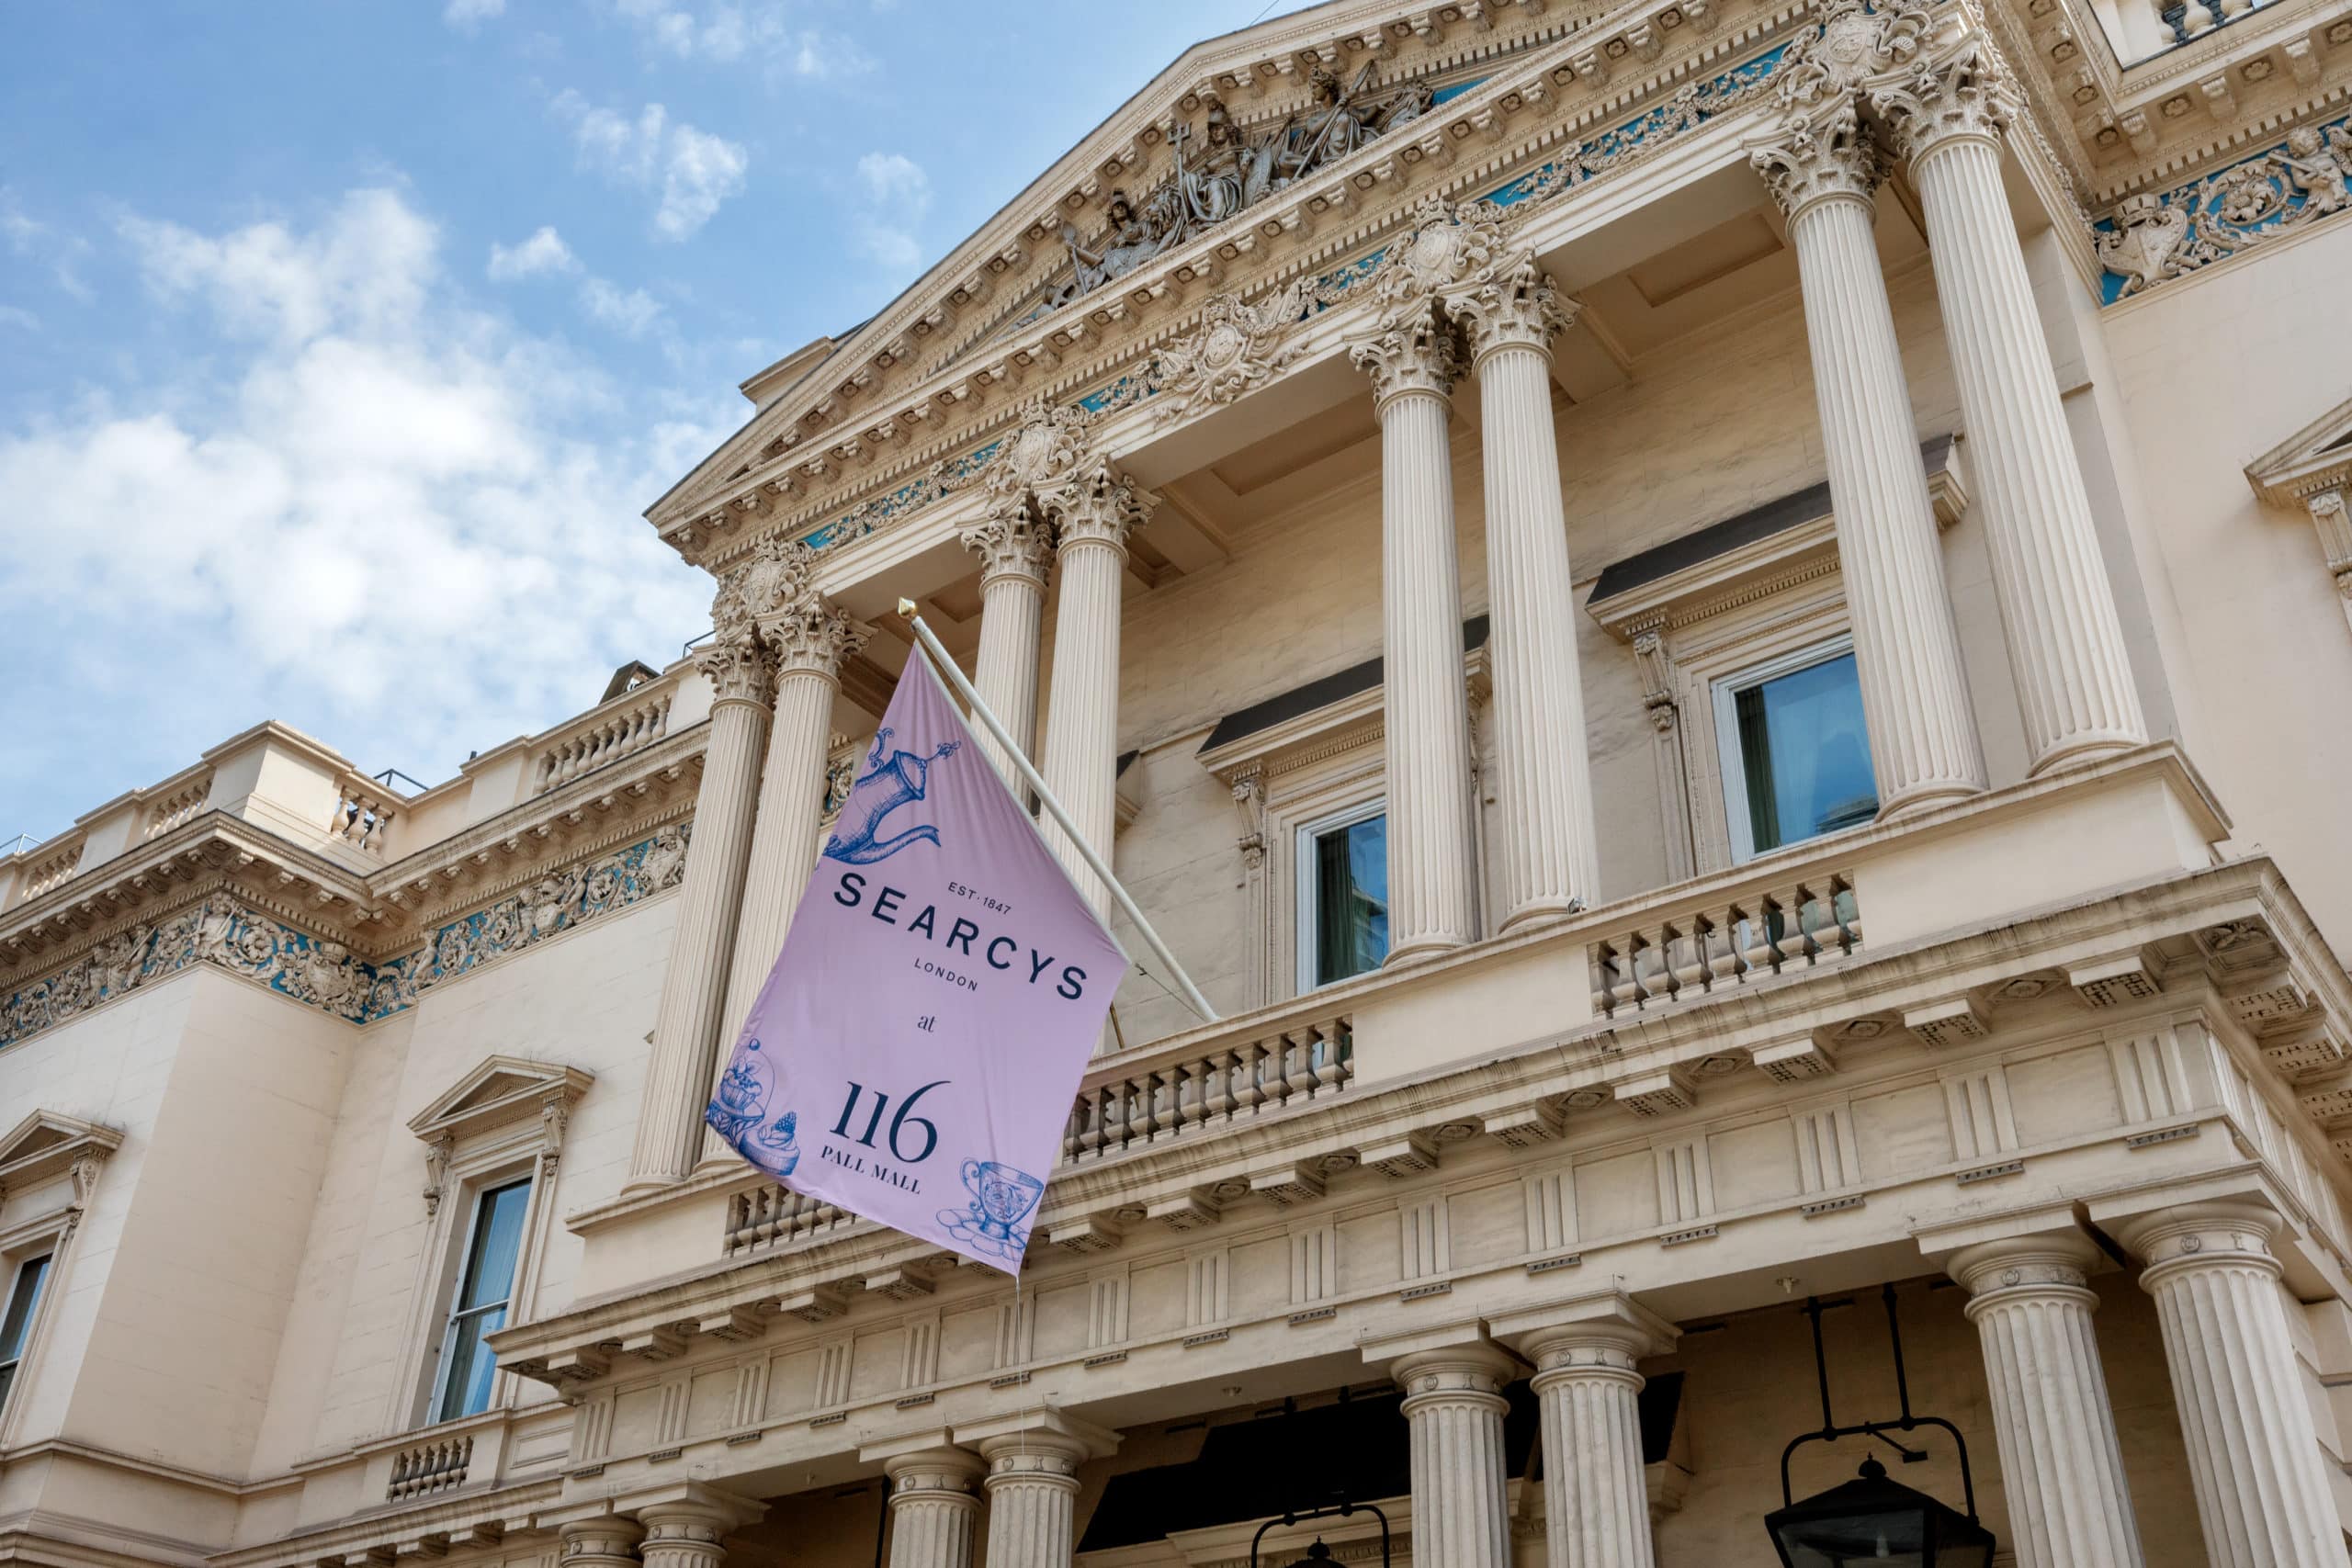 Front of 116 Pall Mall with a purple flag showing the Searcys and 116 Pall Mall logos